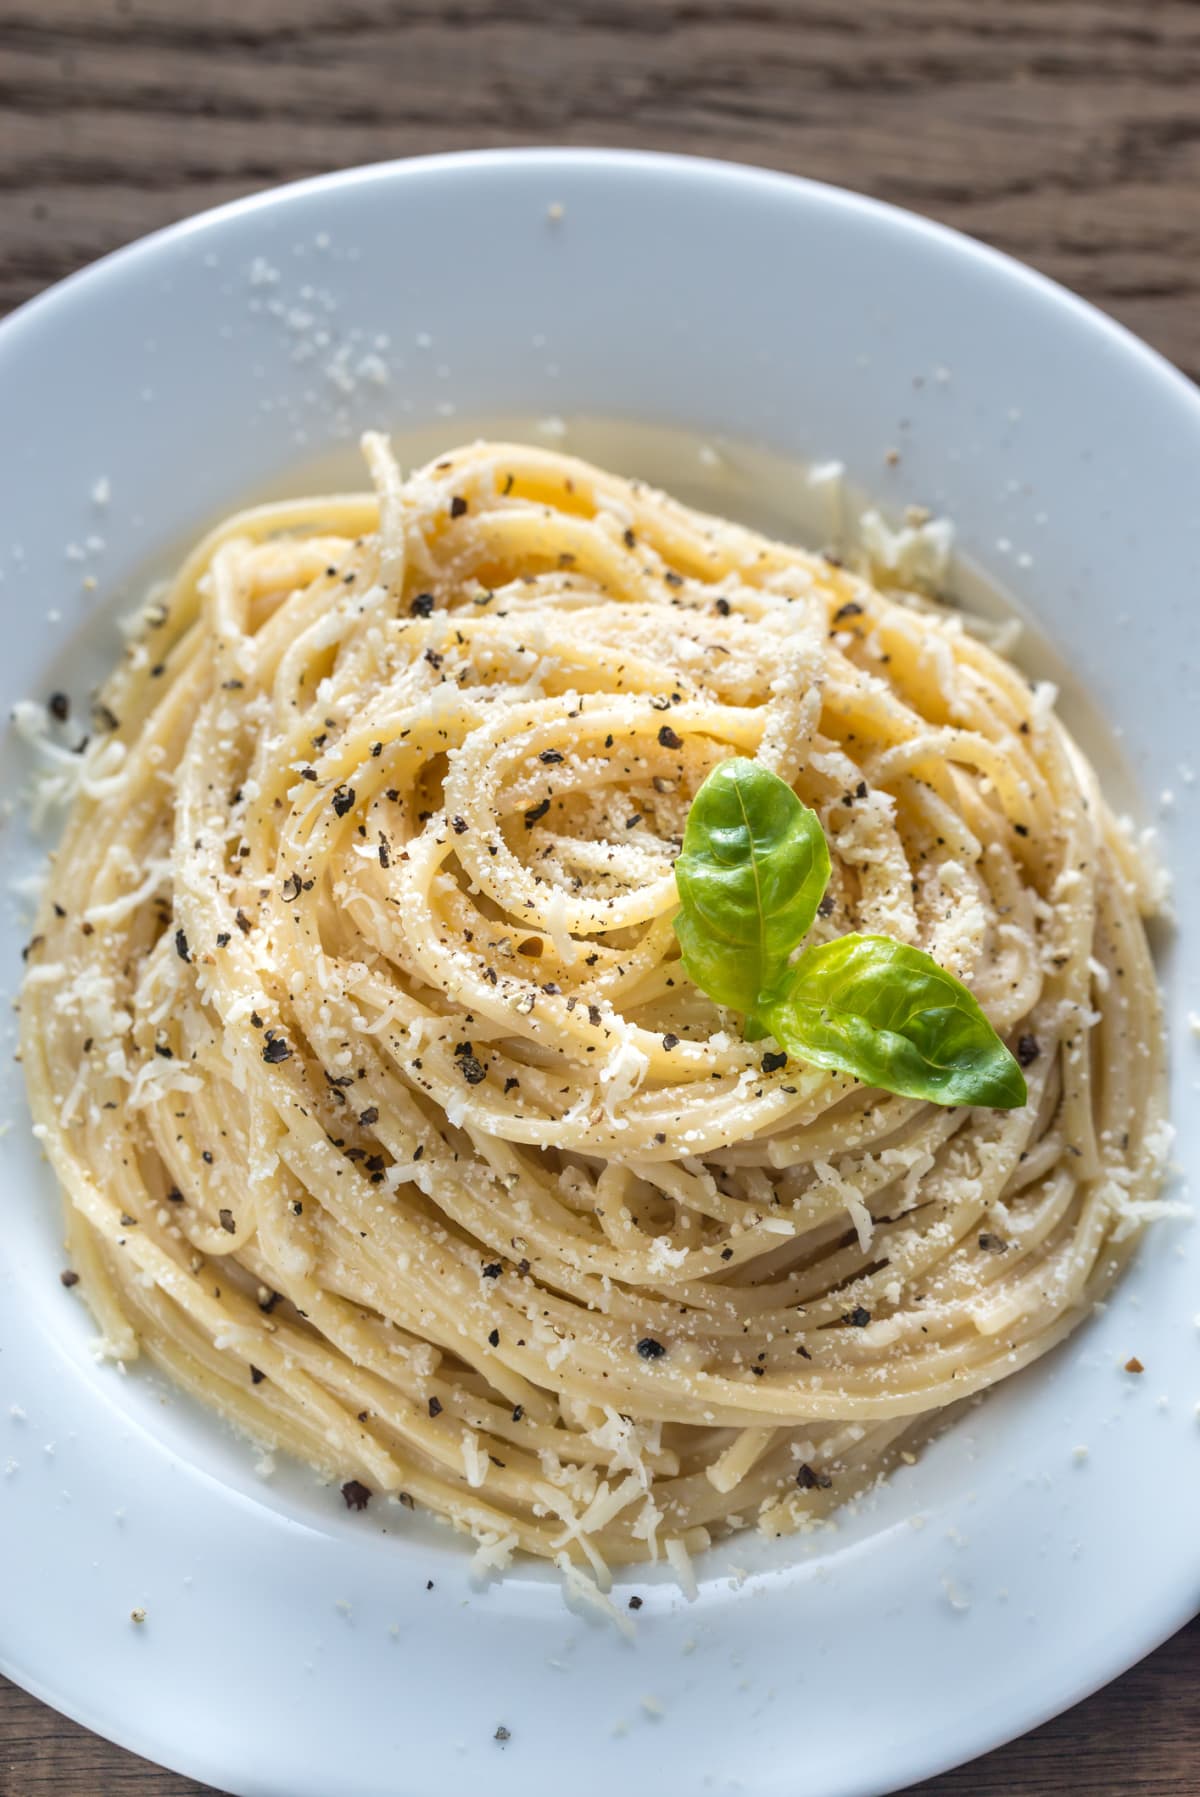 Bucatini Cacio E Pepe. Traditional Bucatini Pasta with Cacio Cheese An Pepper From Lazio. Rome. Italy. Europe. (Photo by: Eddy Buttarelli/REDA&CO/Universal Images Group via Getty Images)